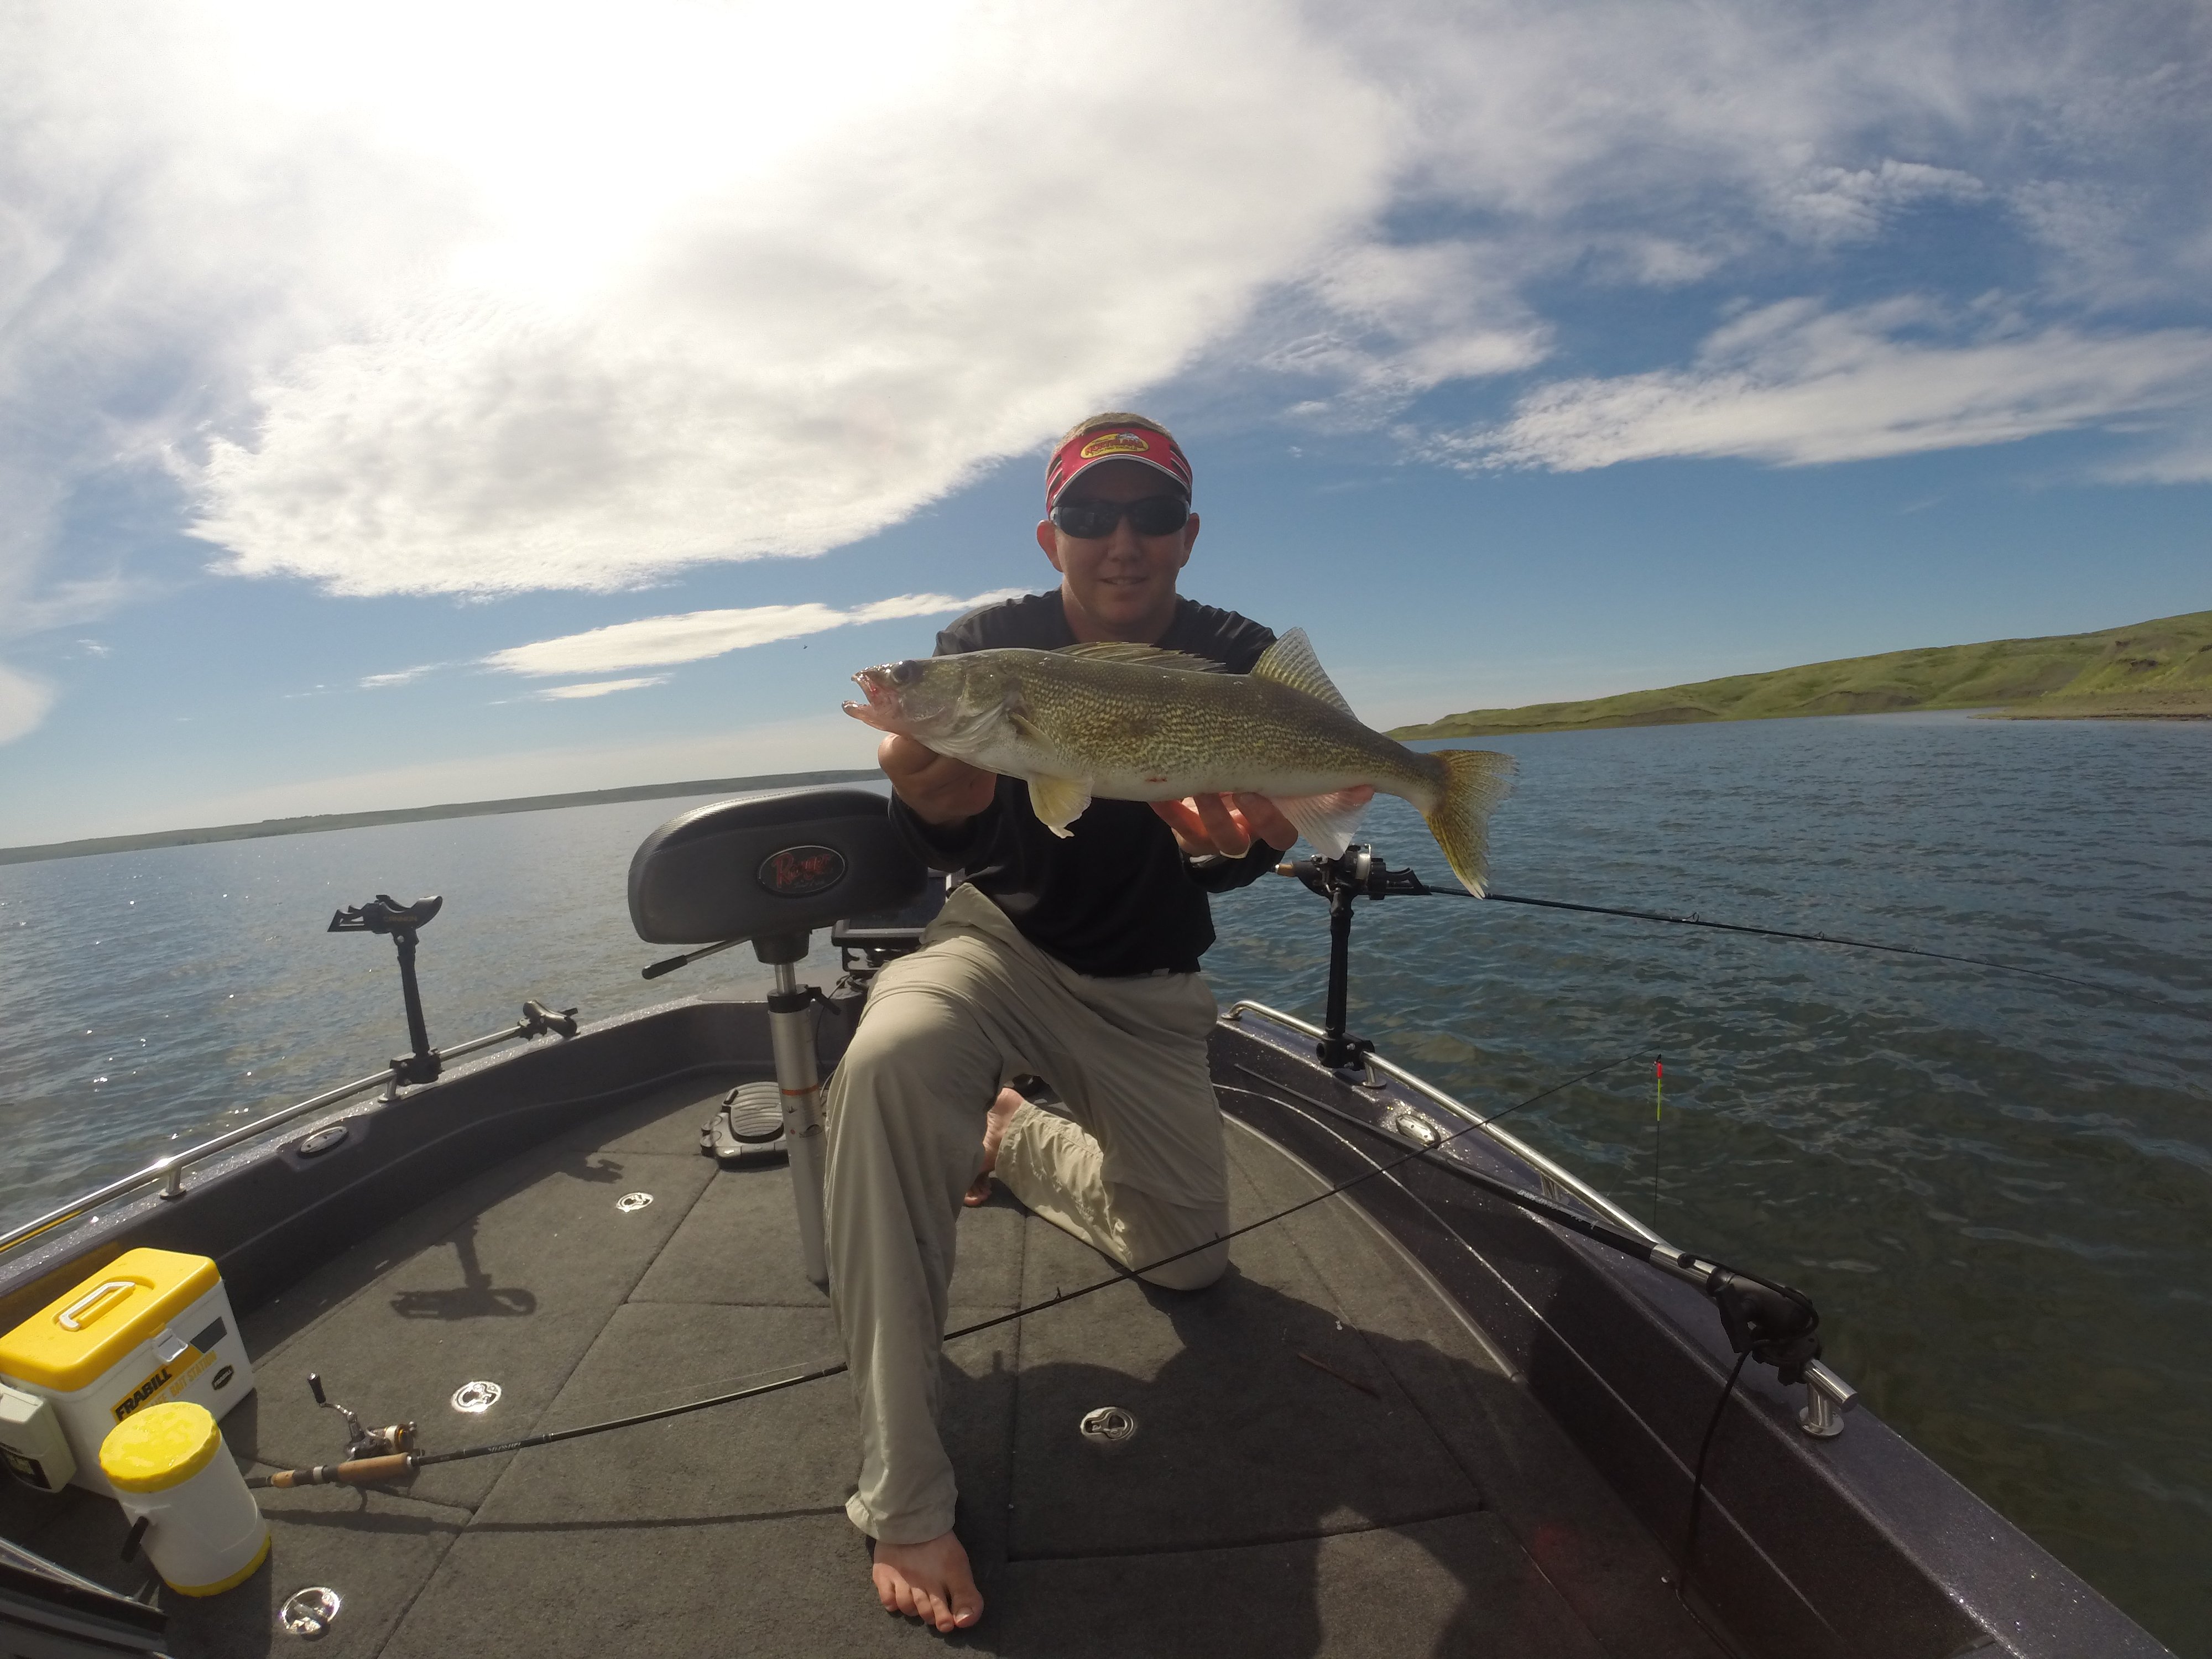 Here in the Dakota’s, it would be tough not agree that live bait walleye snells including spinners account for more fish than any other lure used during the open water season.